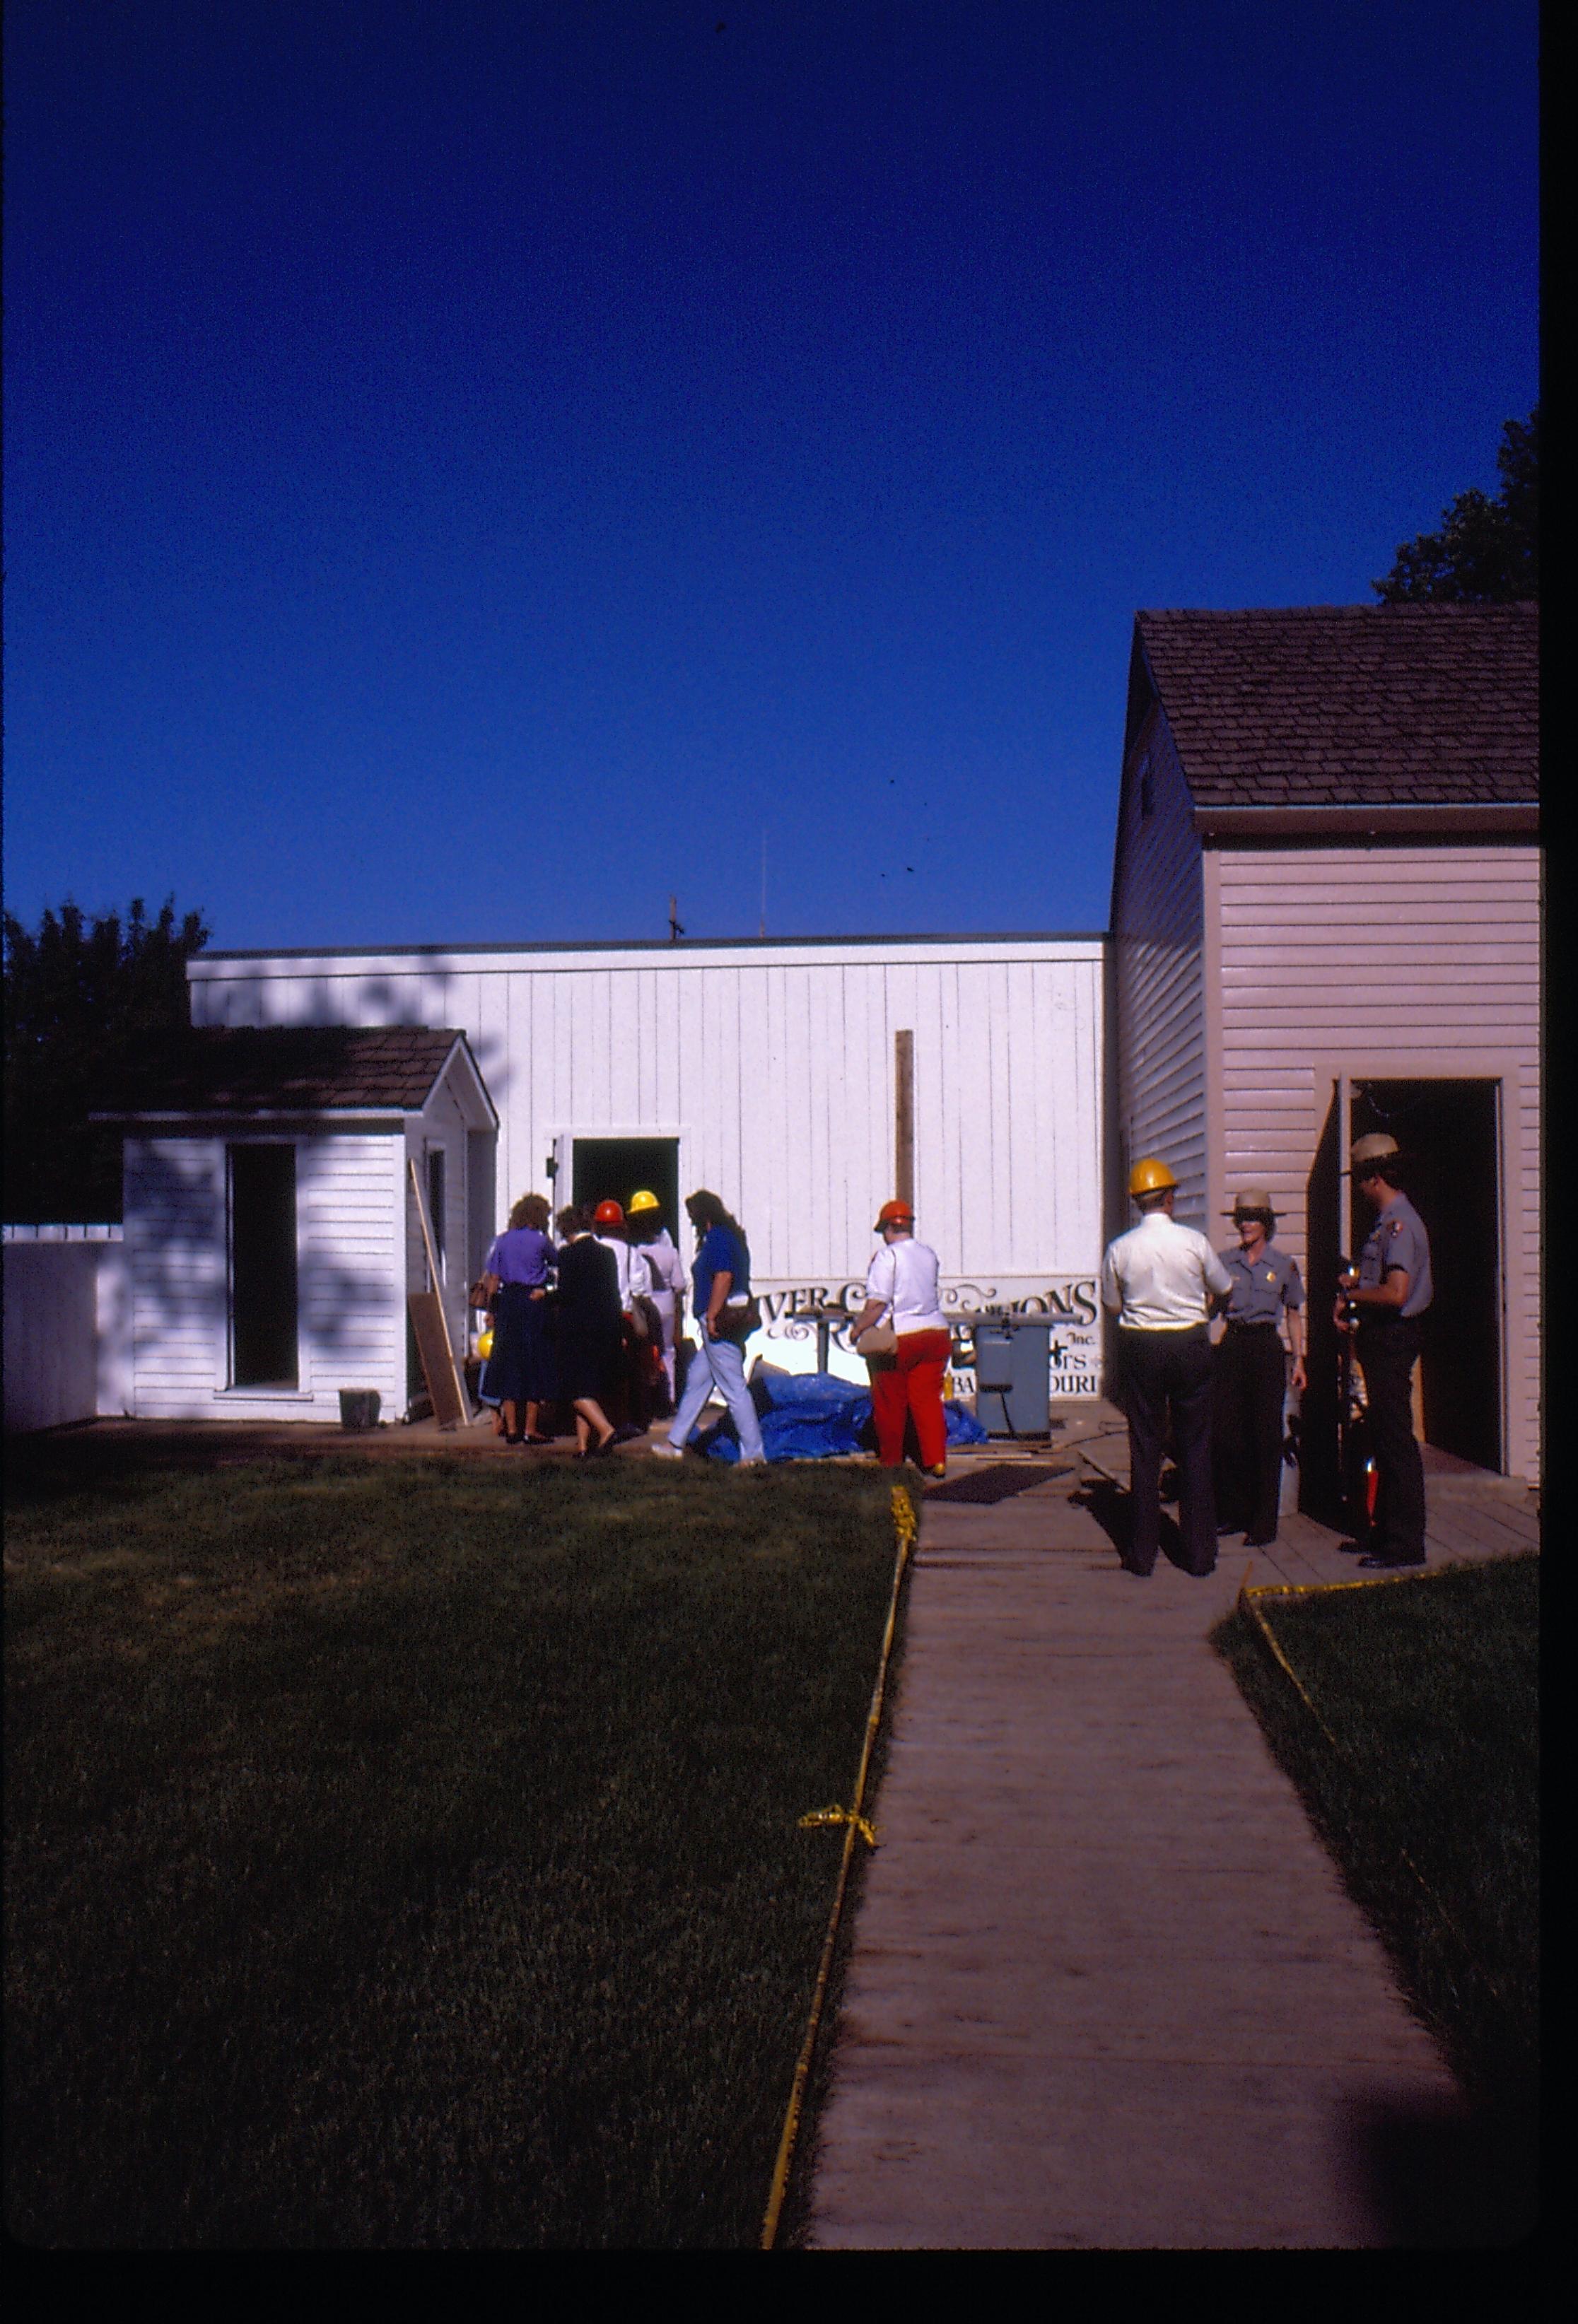 Members of the Colonial Dames on a tour entering the Carriage House in the back yard of the Lincoln Home during the 1987-88 Restoration of the Lincoln Home. Photographer facing east.